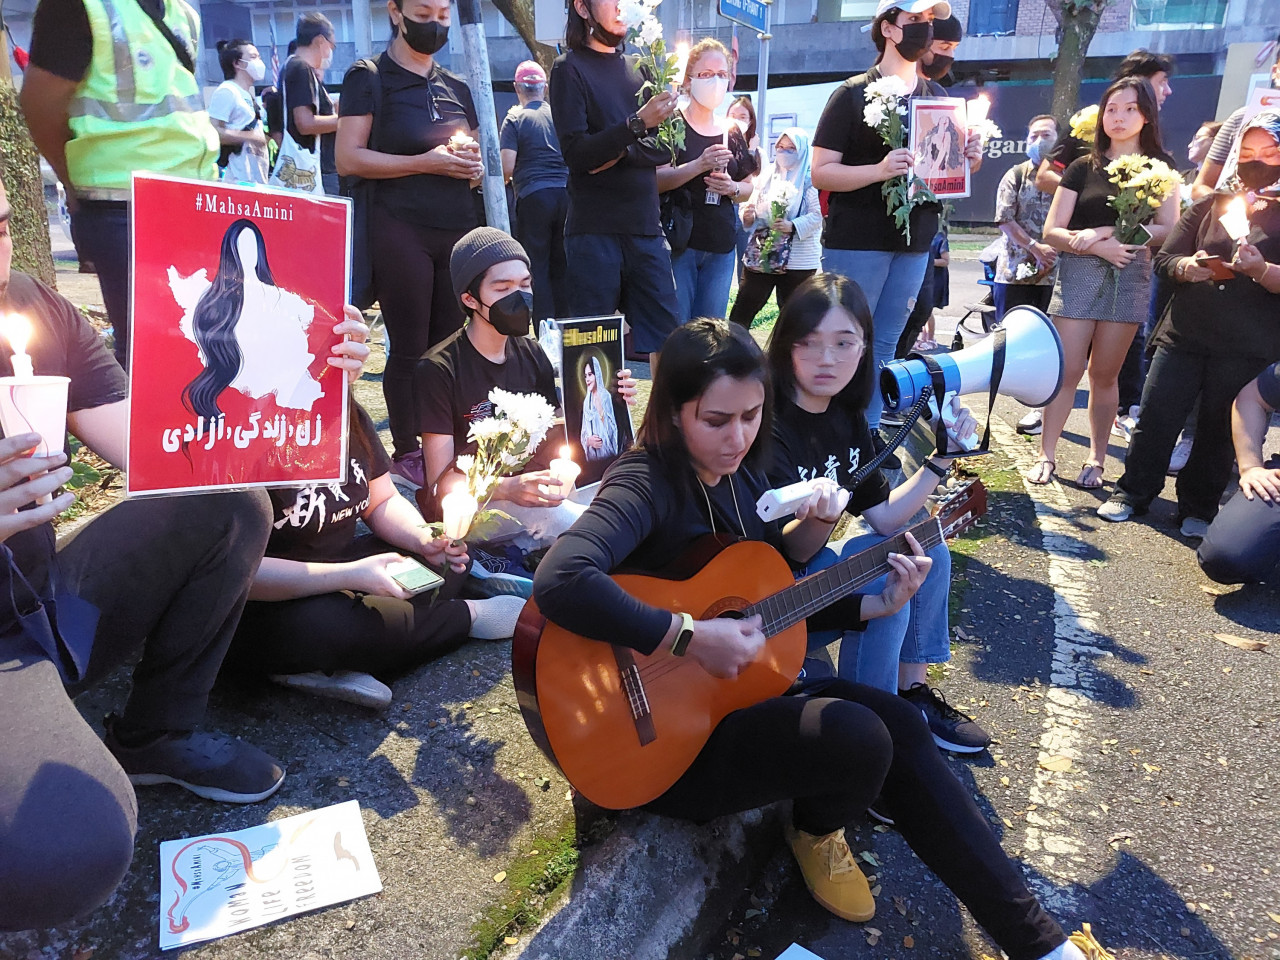 One Iranian female attendee at the candlelight vigil for the slain Mahsa Amini, who only wishes to be identified as Simin (holding guitar), sings a Persian protest song, which she says ‘is dedicated to people who are dying’ in Iran. – A. AZIM IDRIS/The Vibes pic, September 25, 2022